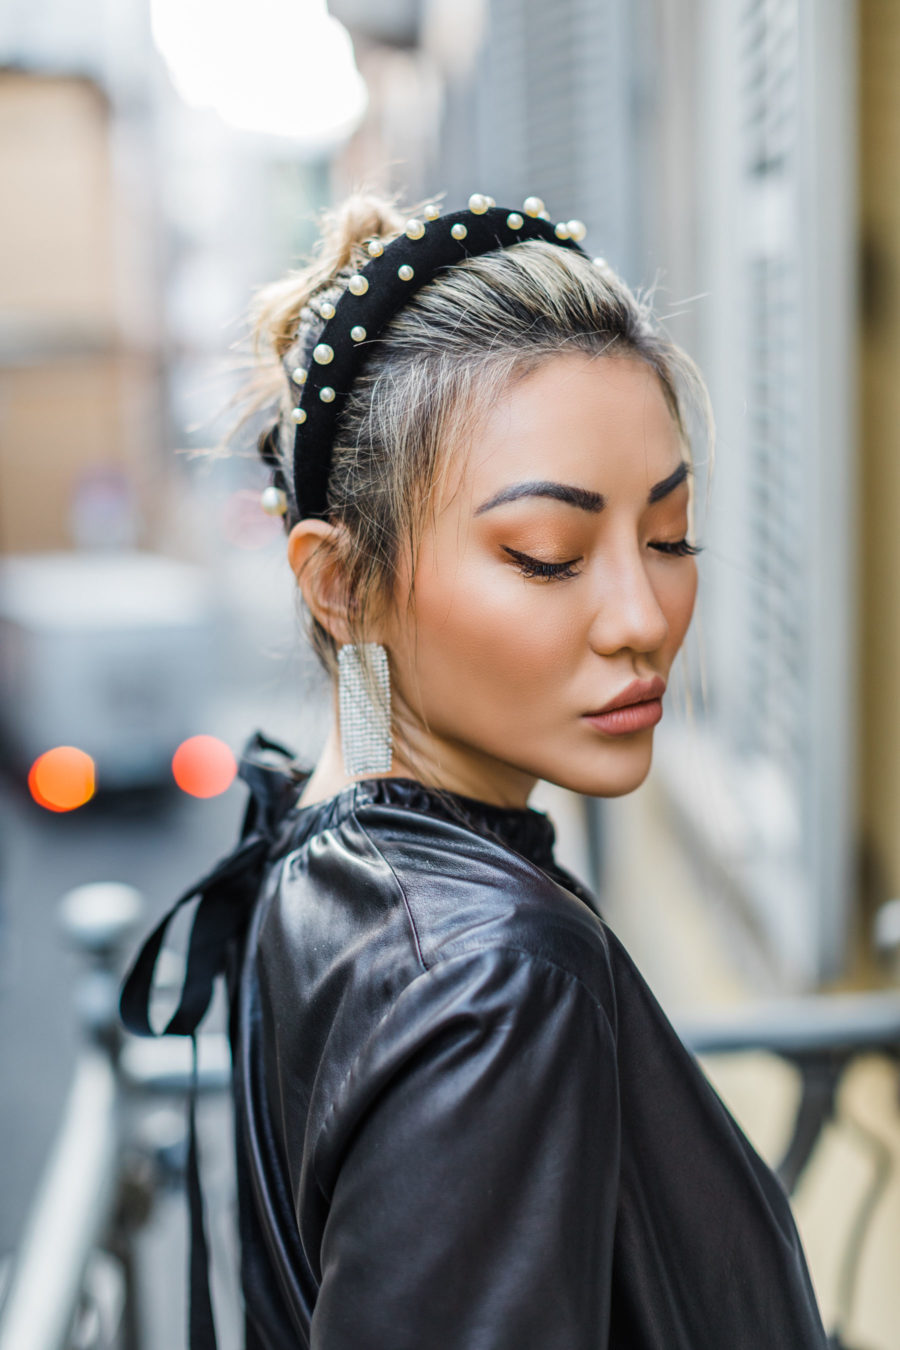 fashion blogger jessica wang wears embellished headband and affordable accessories from Amazon // Jessica Wang - Notjessfashion.com